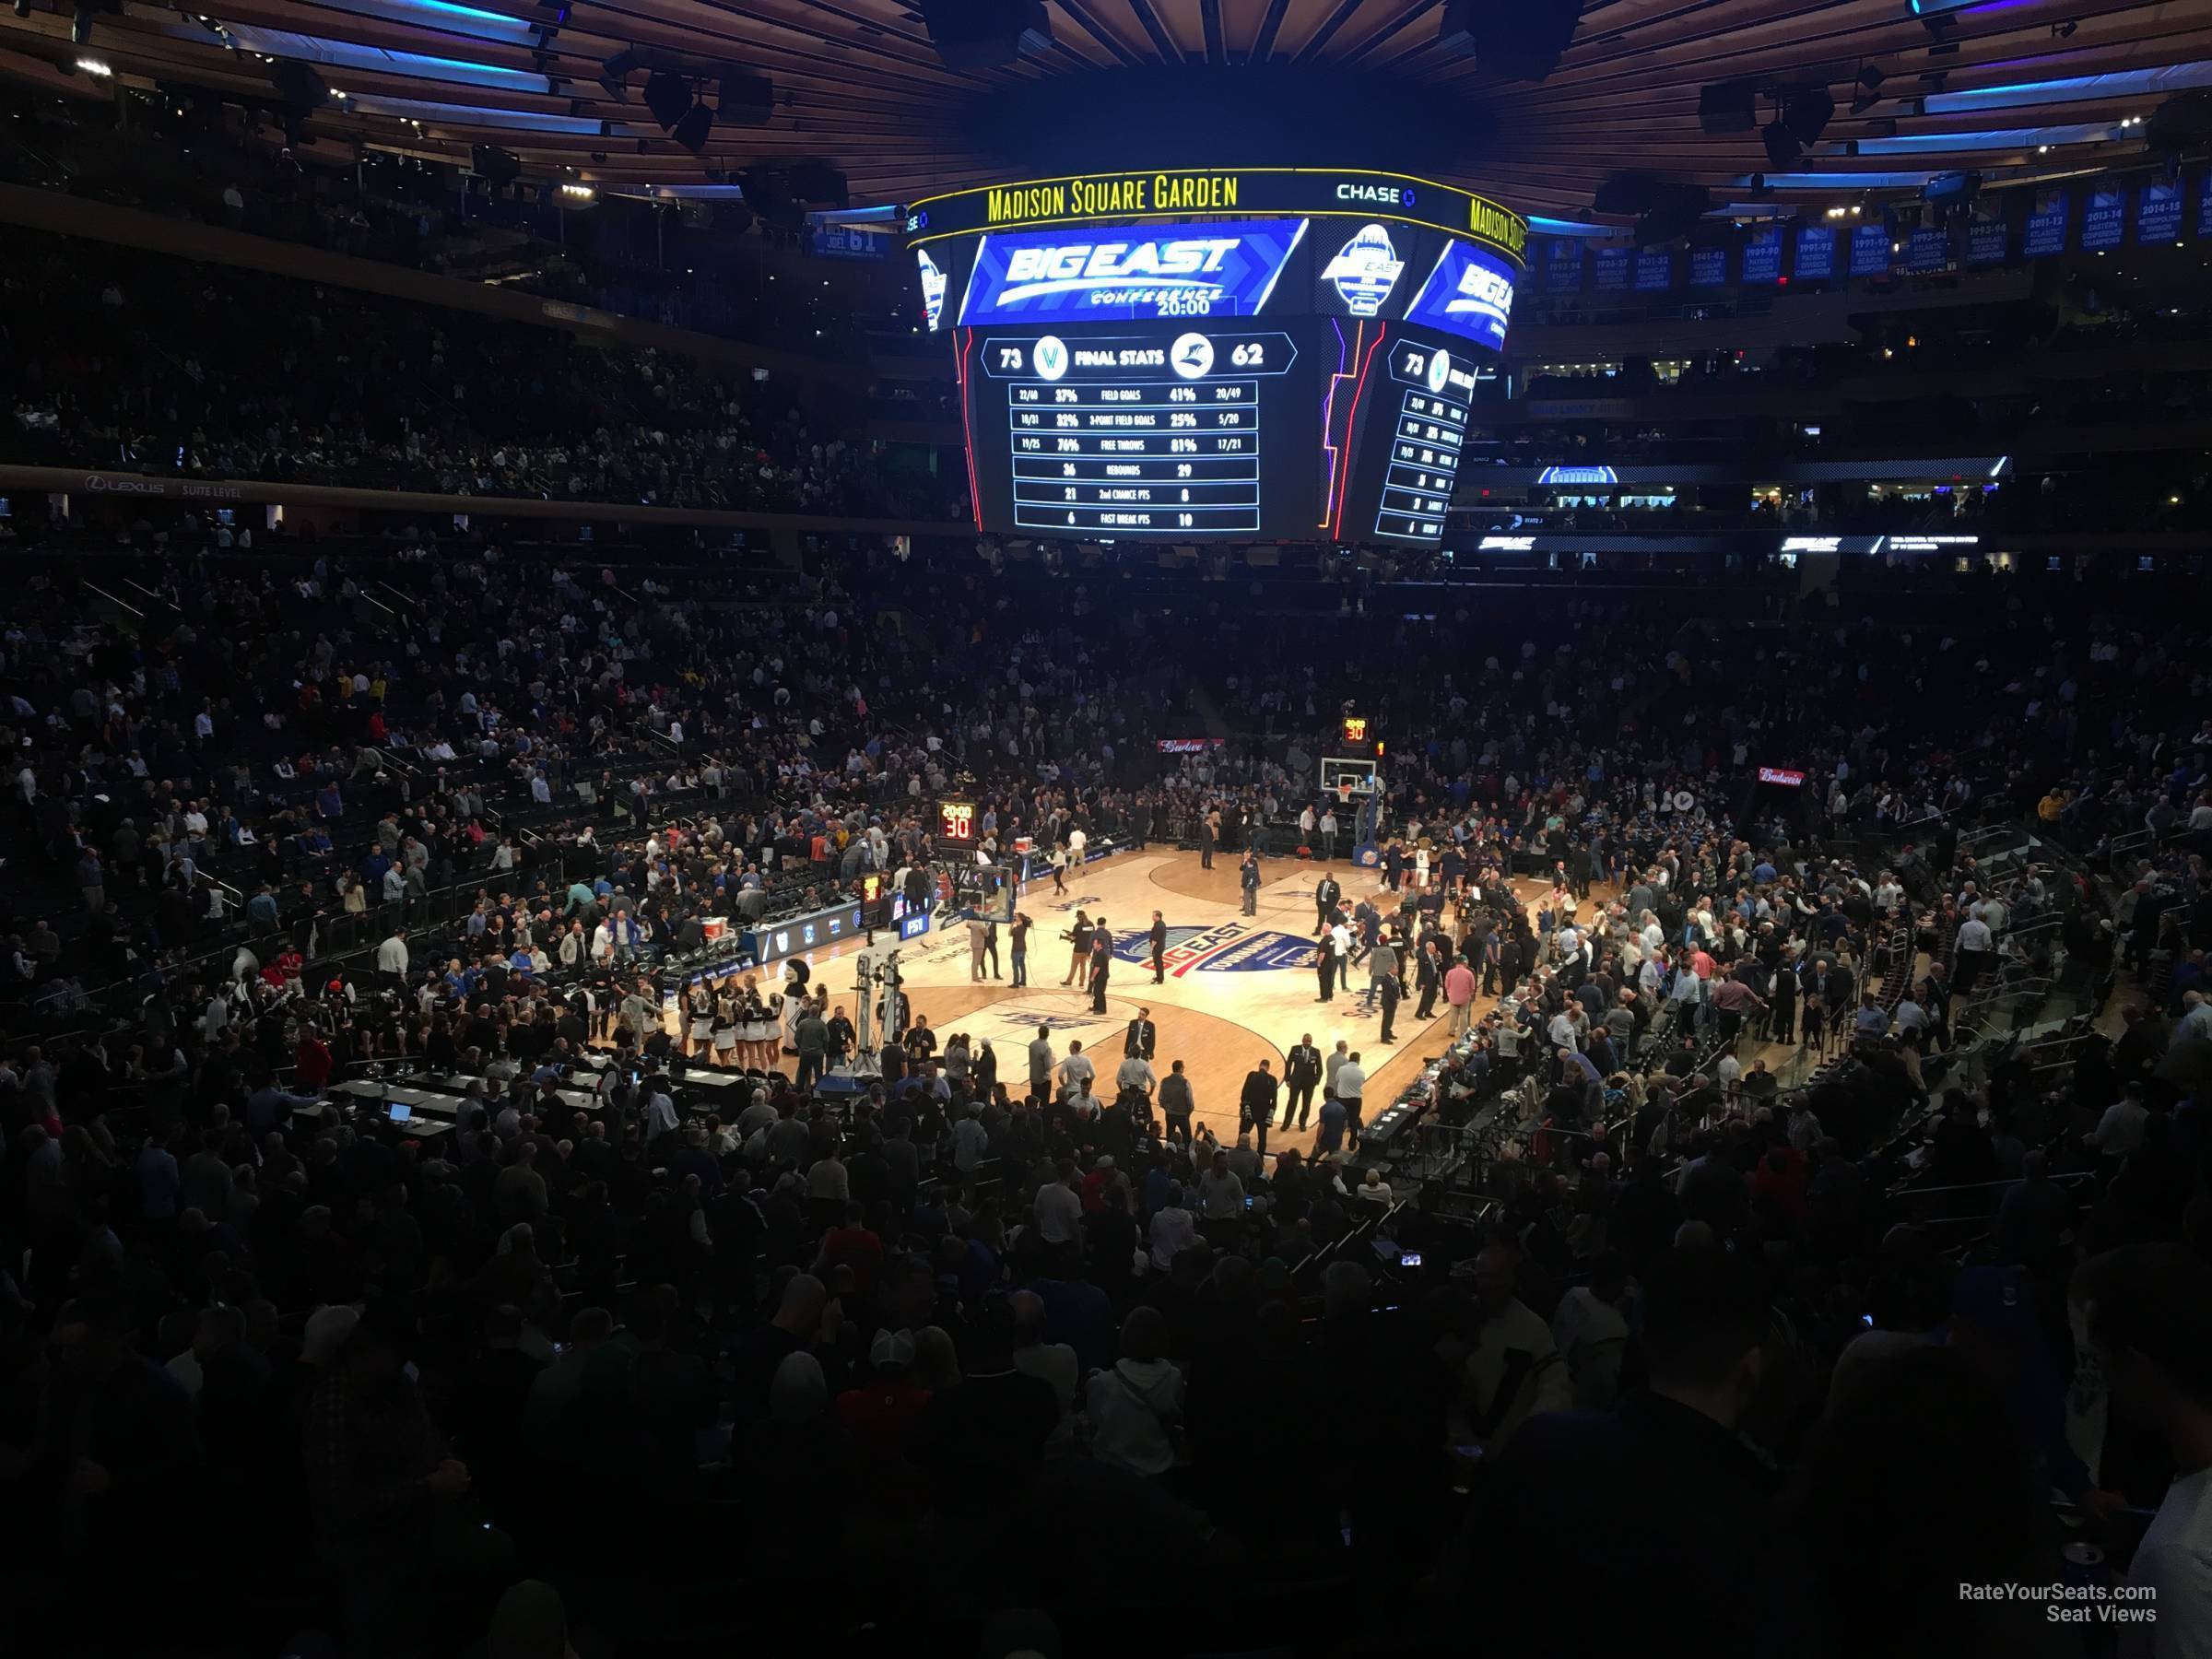 madison club 66, row 1 seat view  for basketball - madison square garden